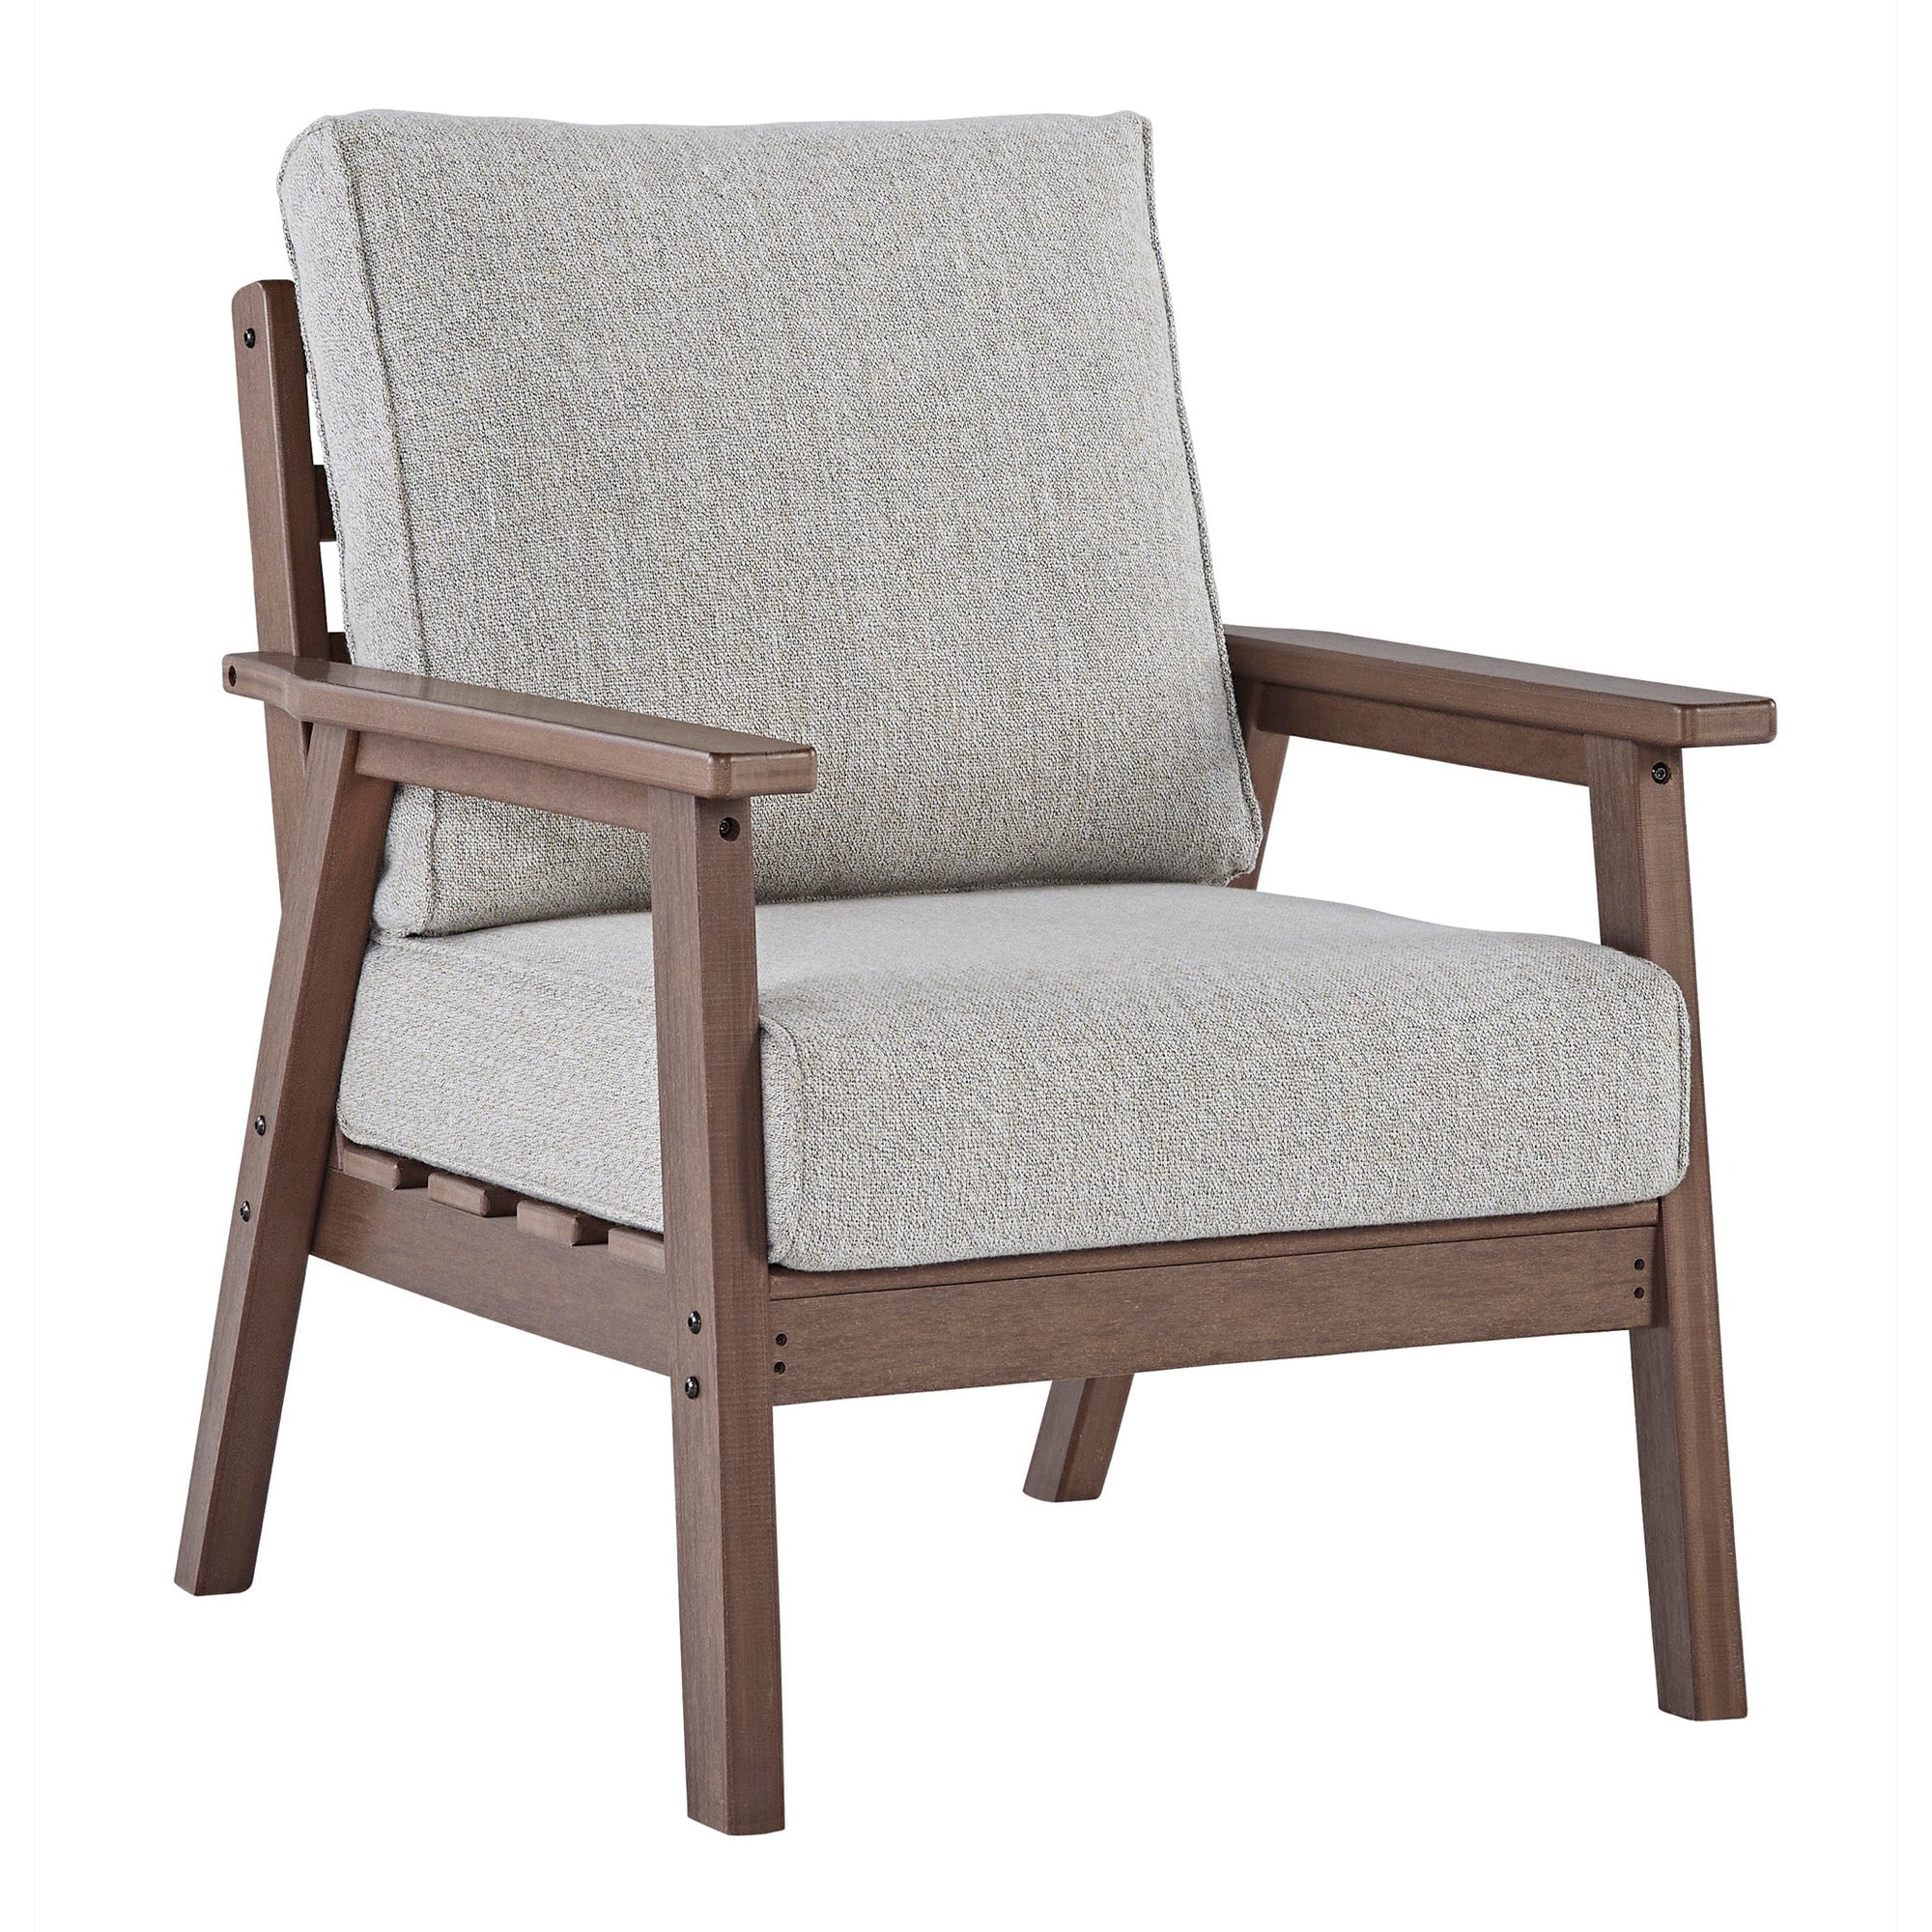 Poly Redwood Outdoor Club Chair